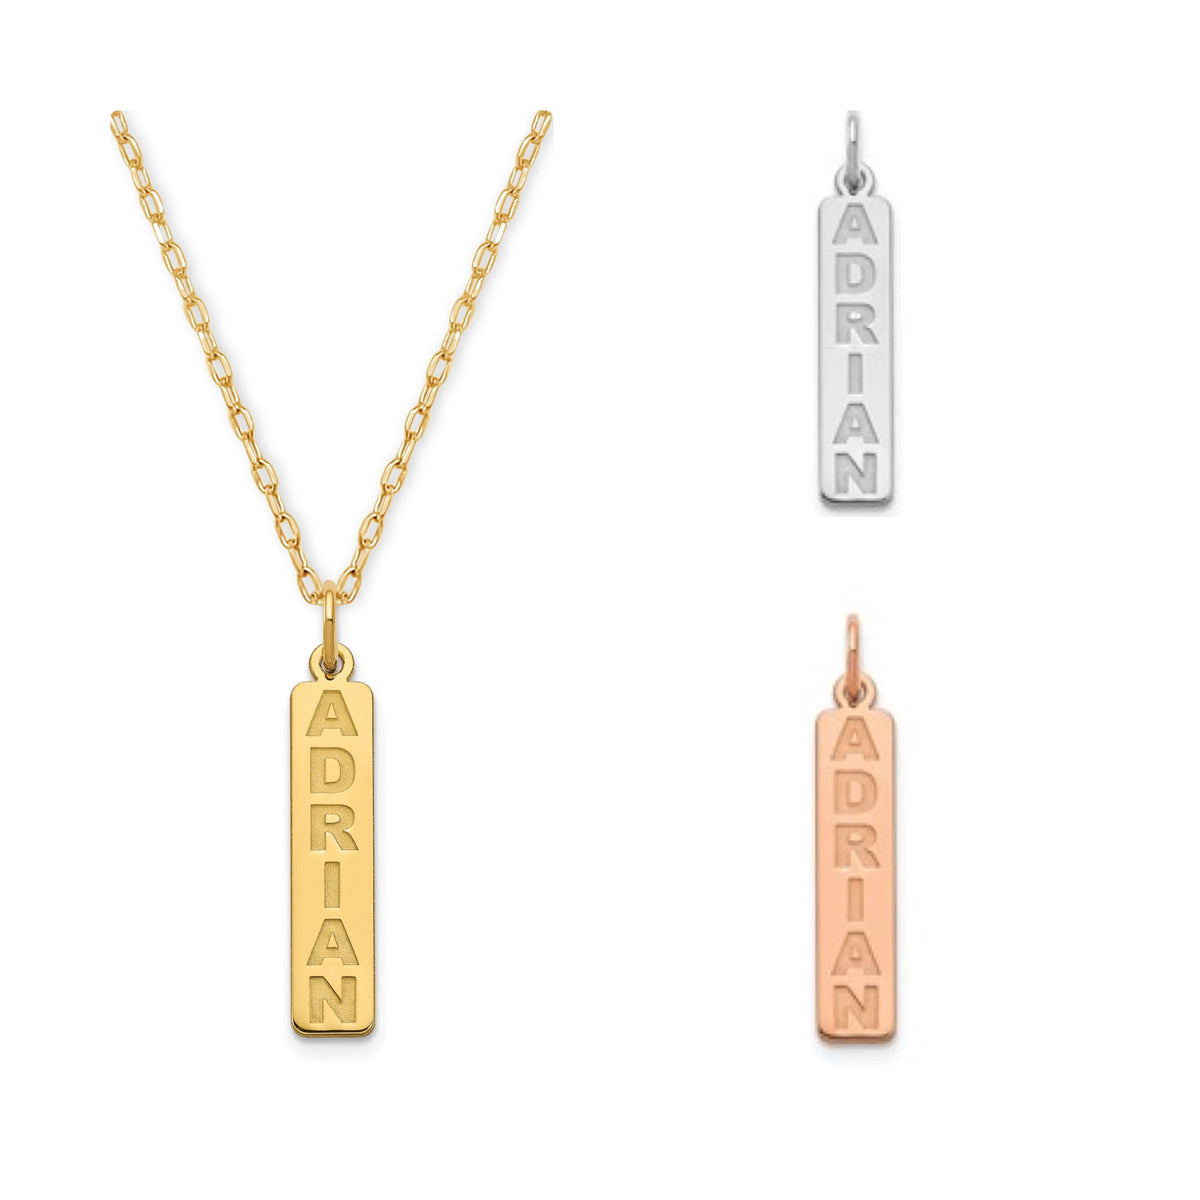 Personalized Vertical Name Pendant Necklace included  in Sterling Silver , Gold Plated, Rose Gold Plated or 10k Gold Laser Engraved